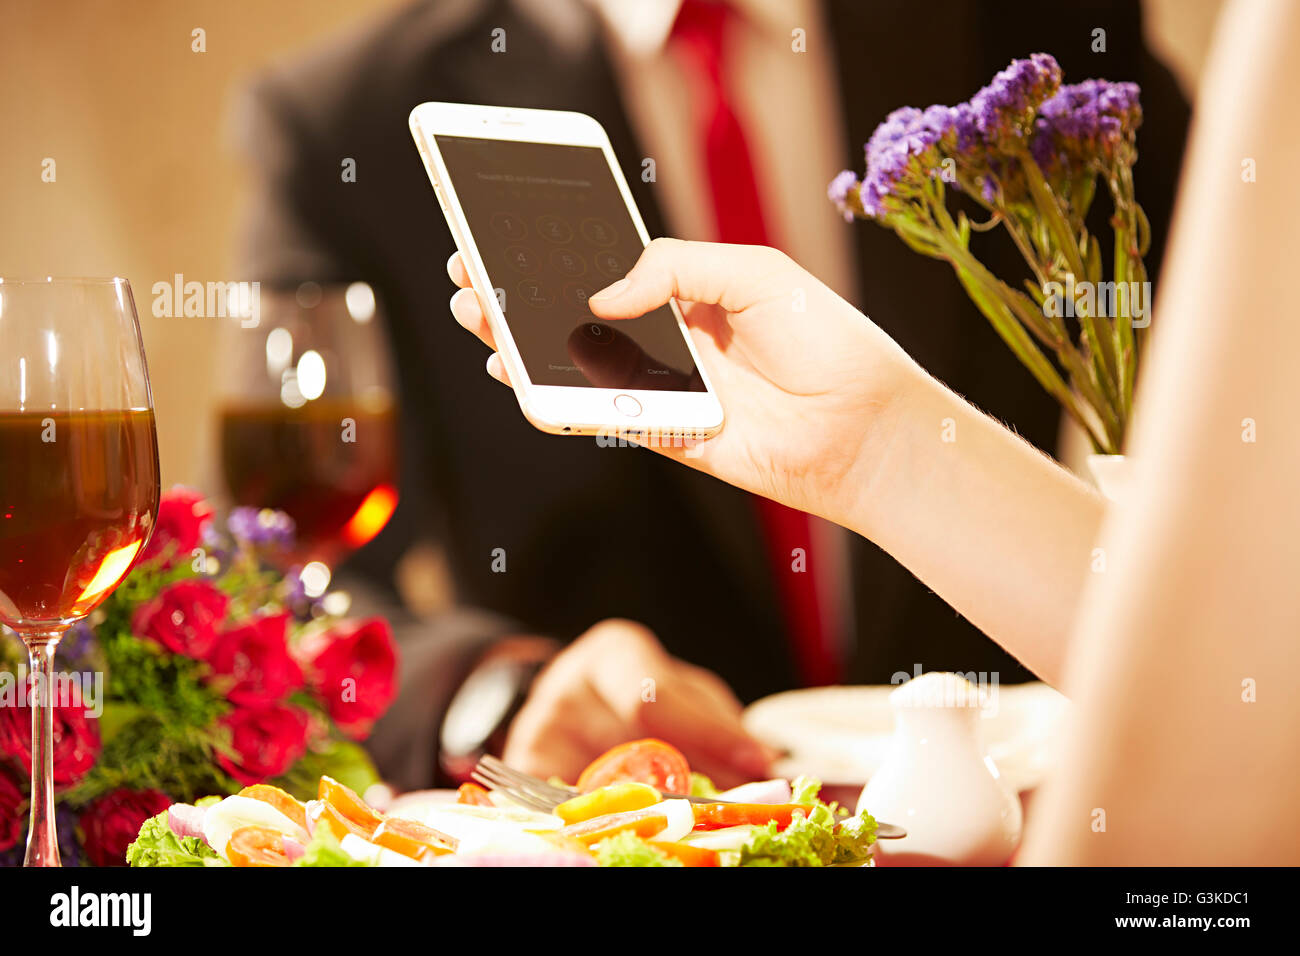 2 Foreigner Married Couples Hotel Dating dialing mobile Phone Stock Photo